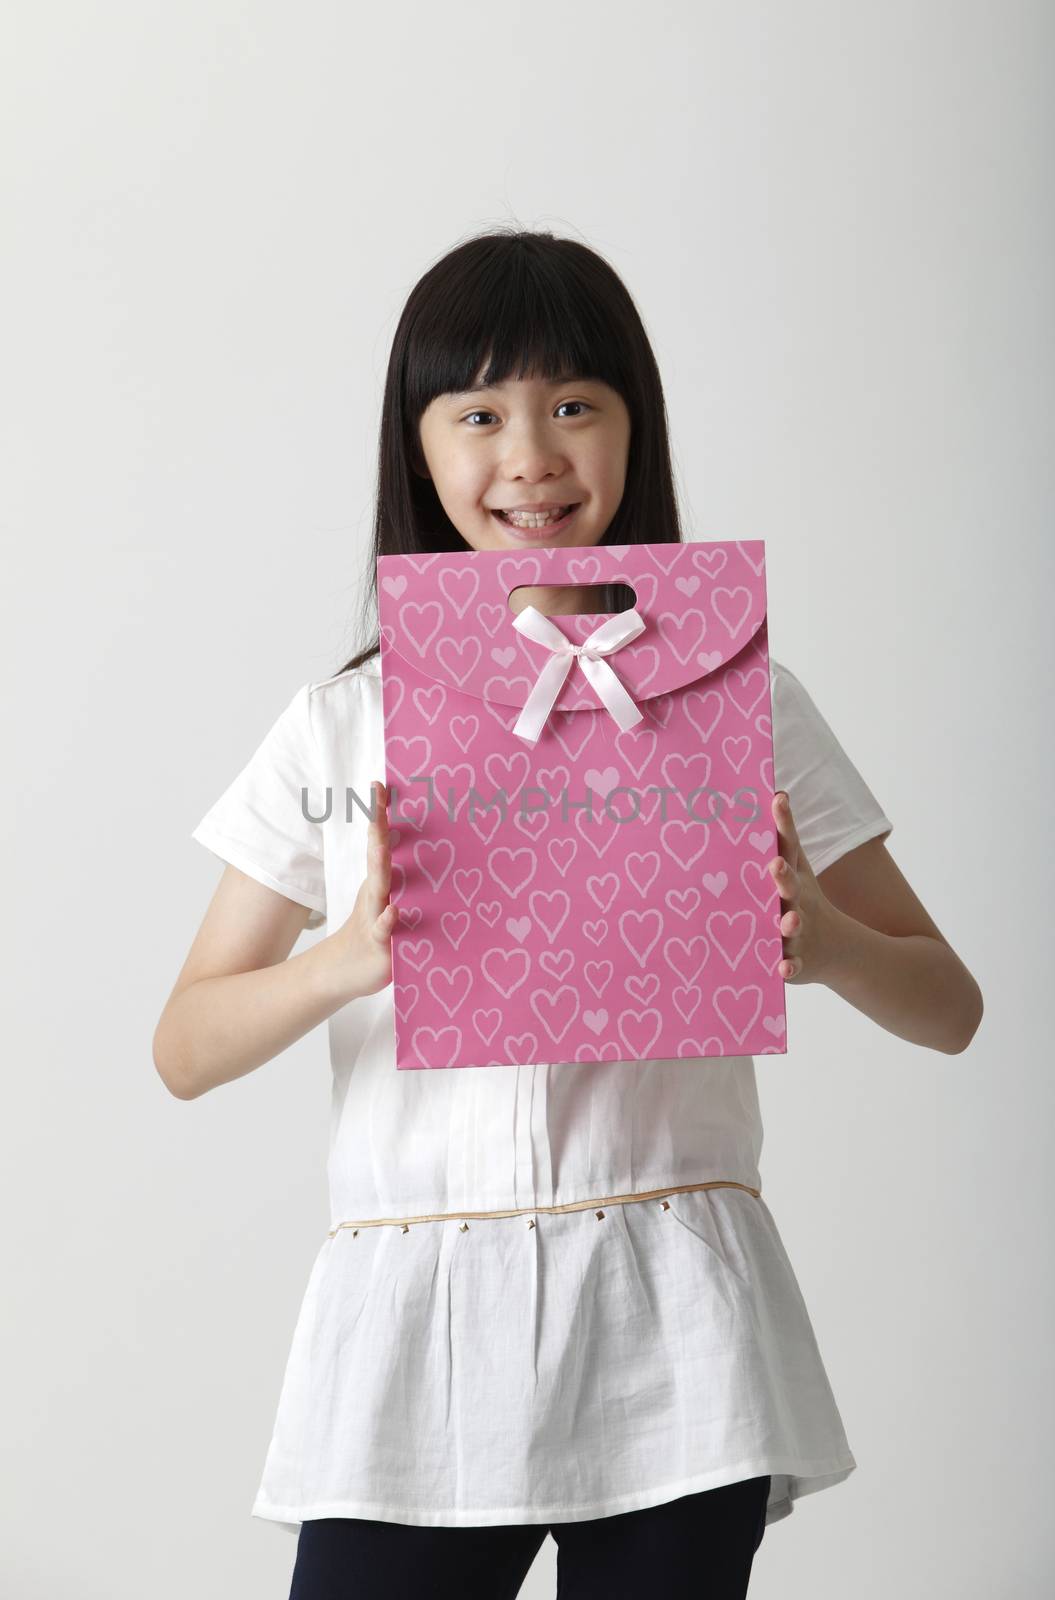 chinese girl holding a present bag